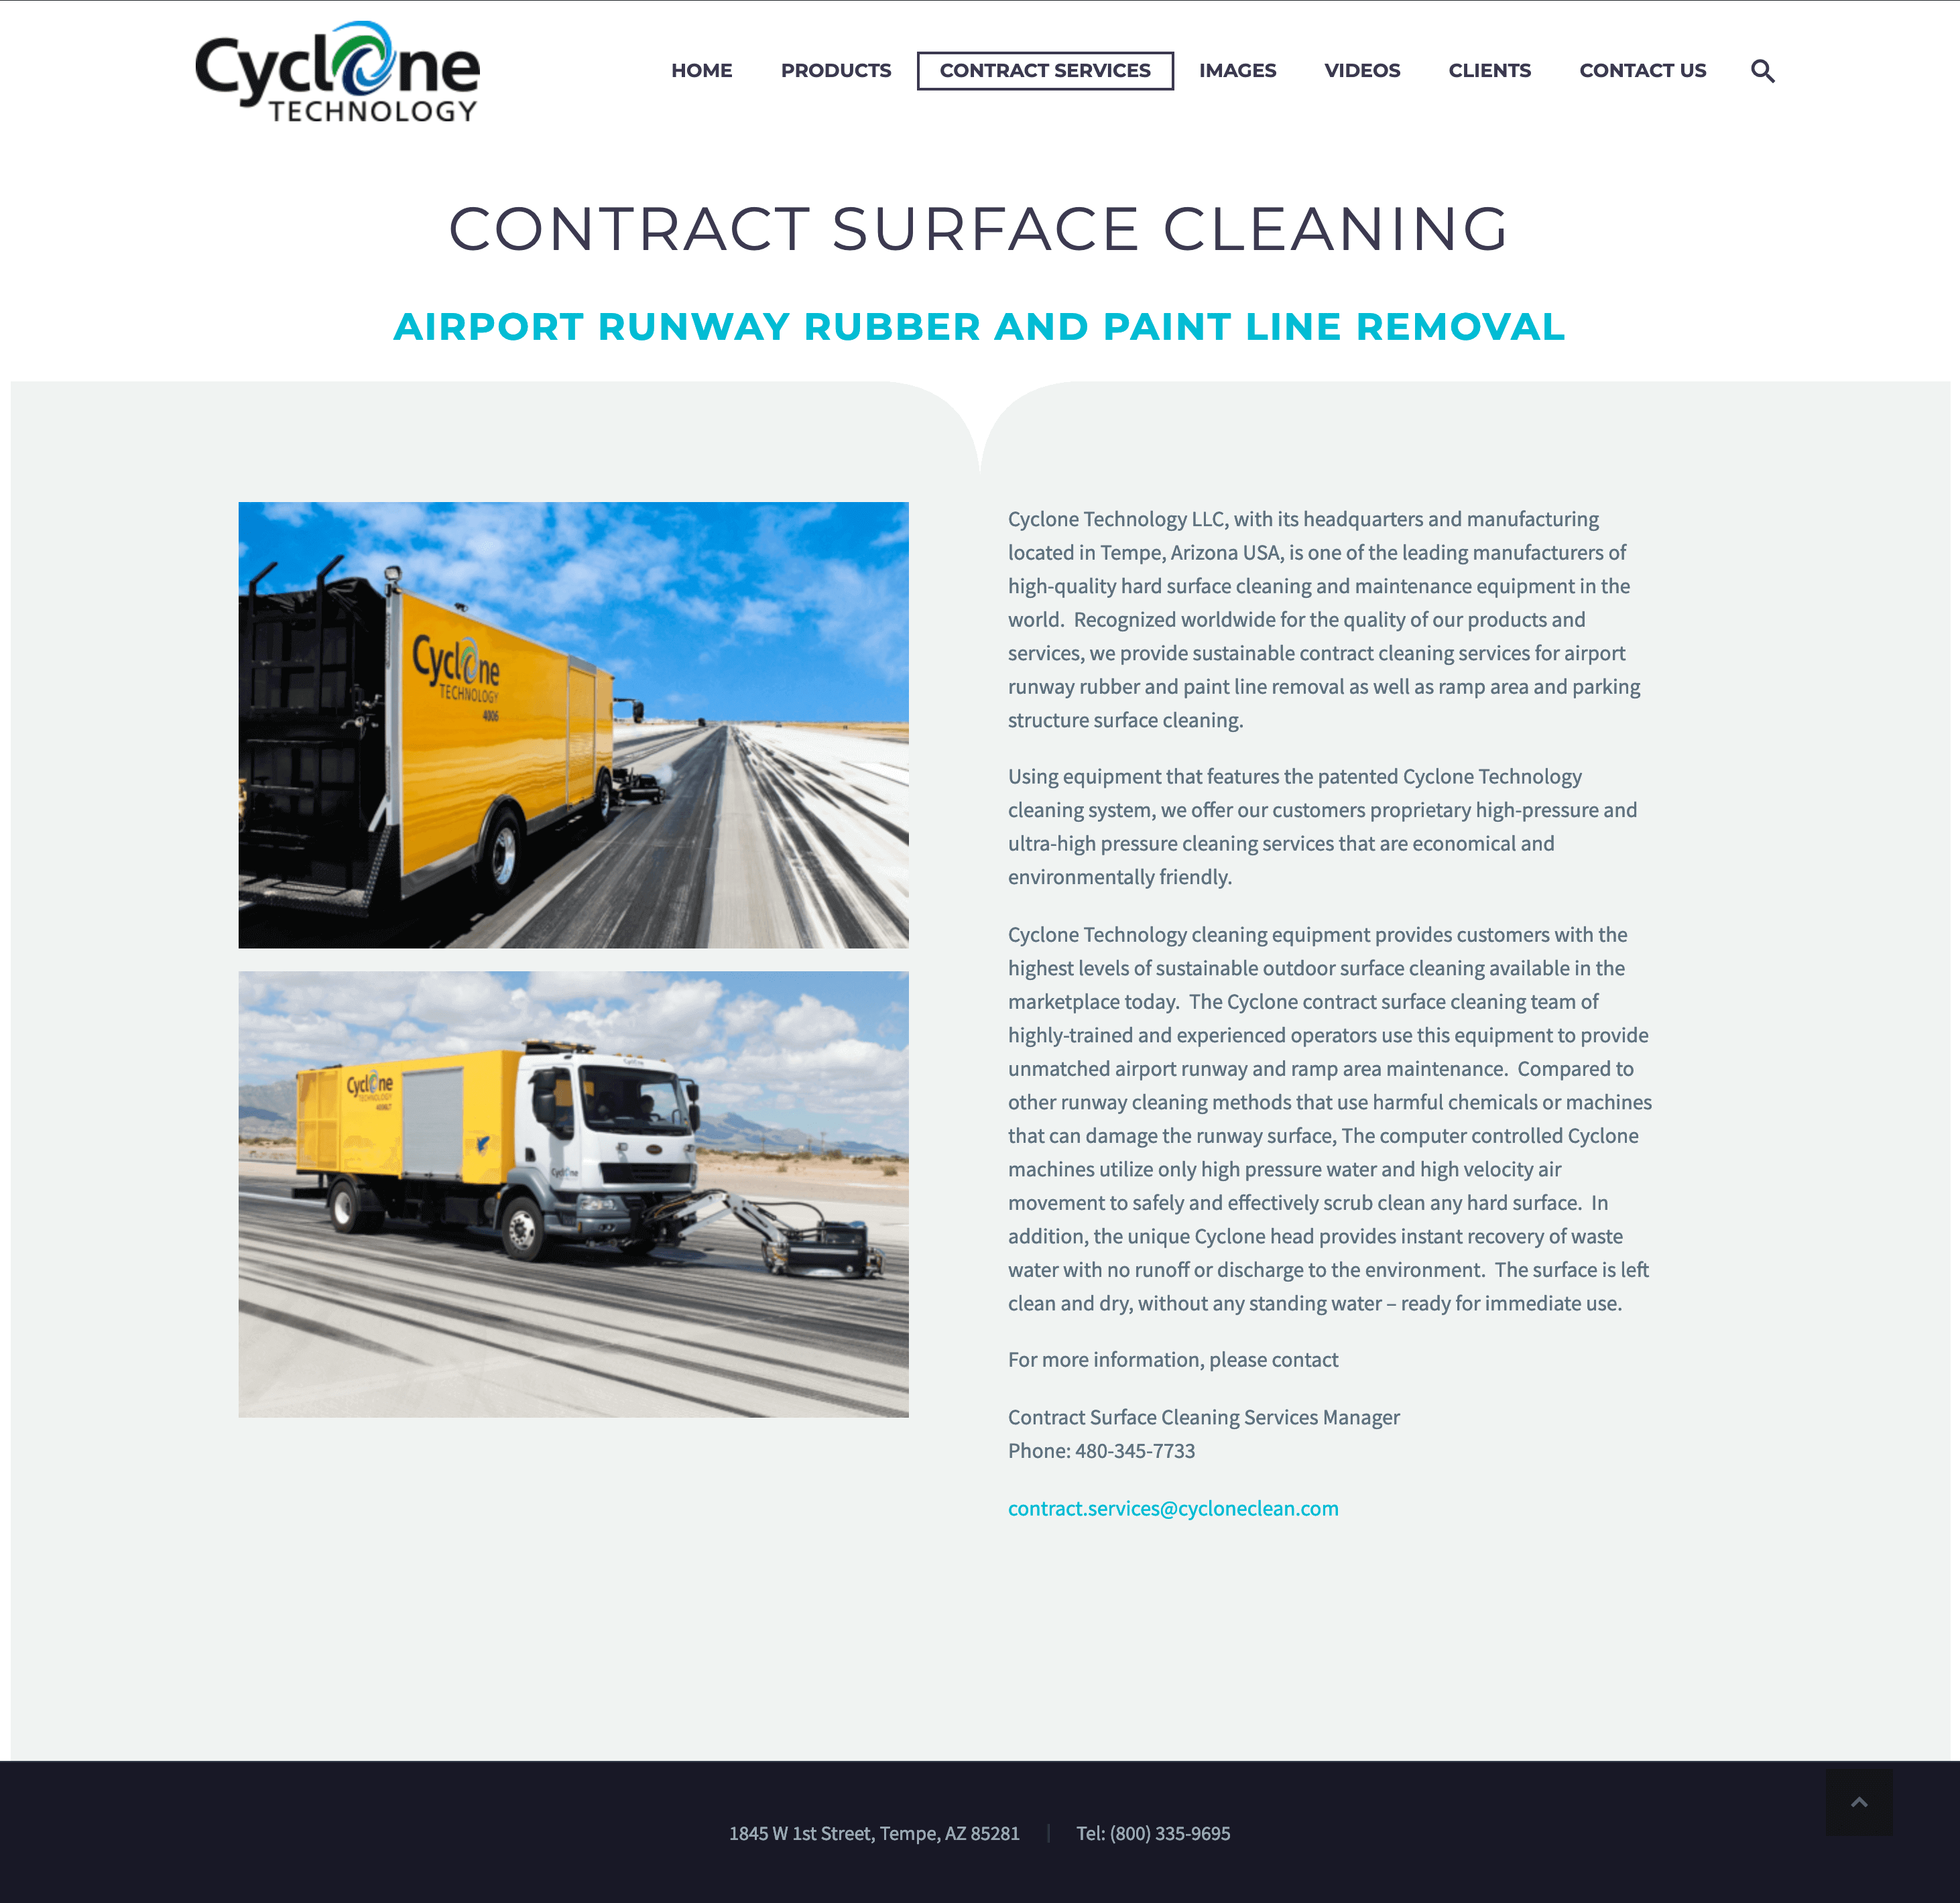 cyclone-clean-technology-surface-cleaning-website-design